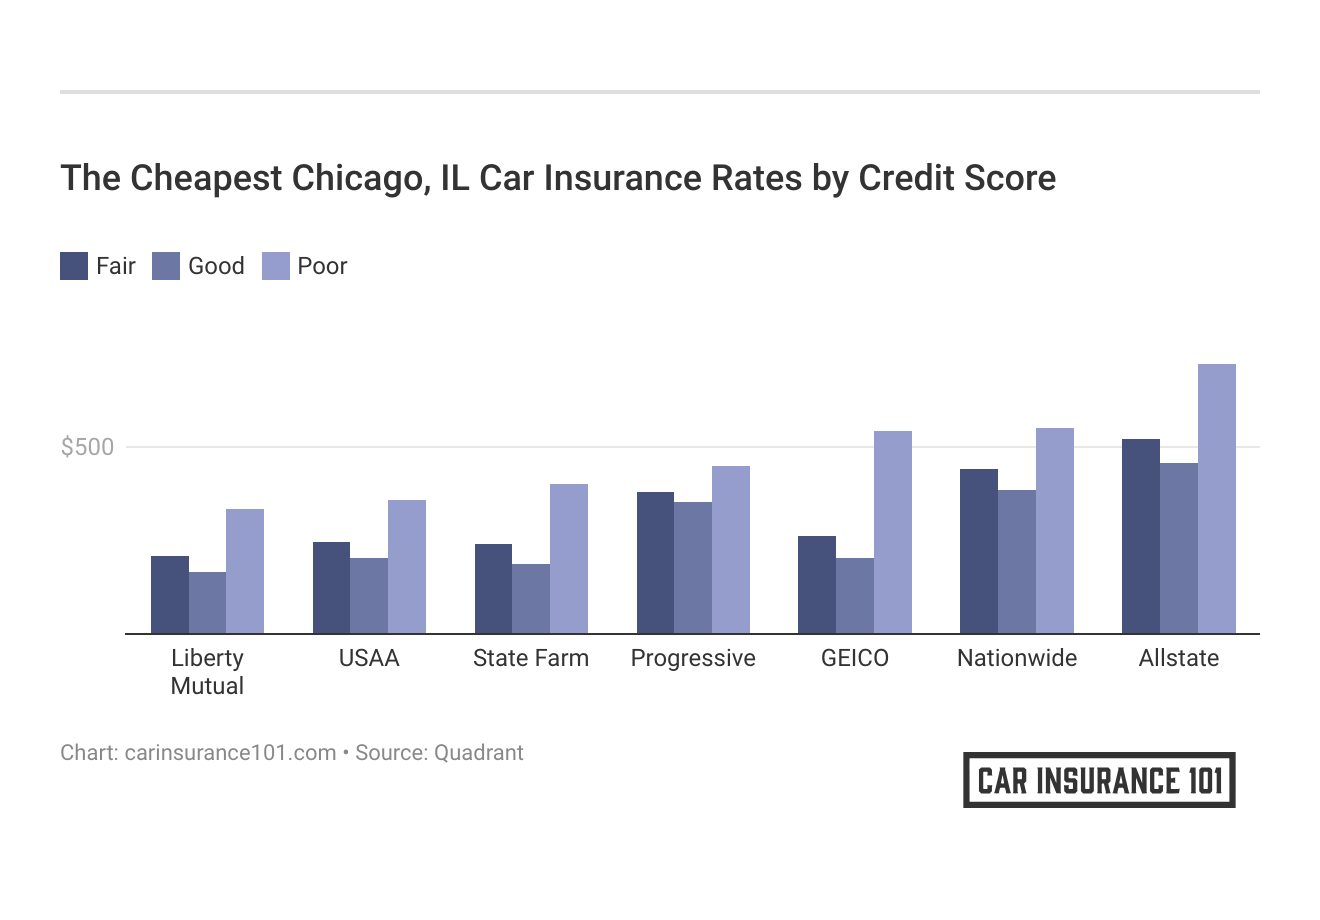 <h3>The Cheapest Chicago, IL Car Insurance Rates by Credit Score</h3>